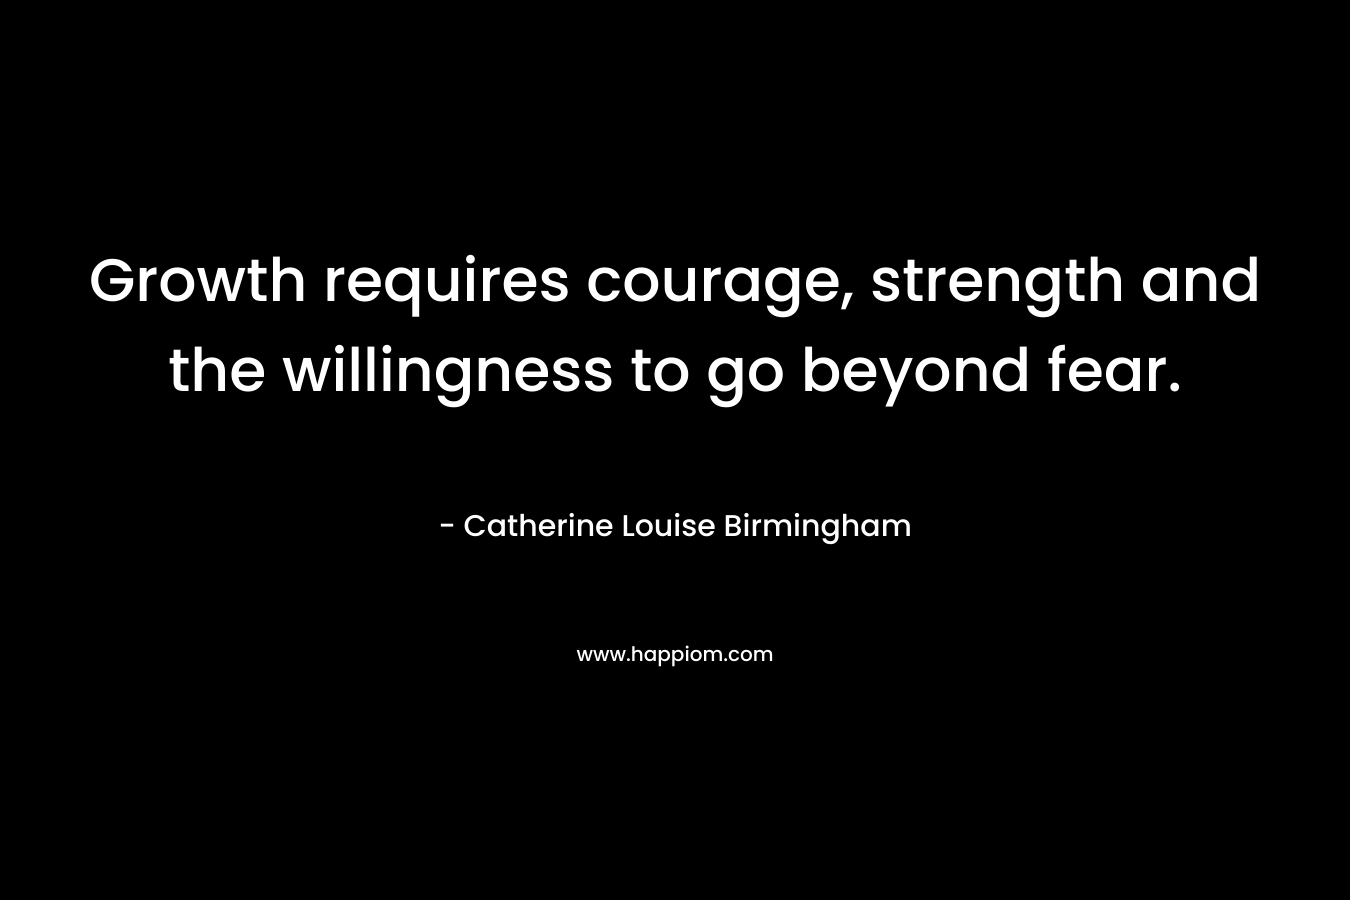 Growth requires courage, strength and the willingness to go beyond fear.